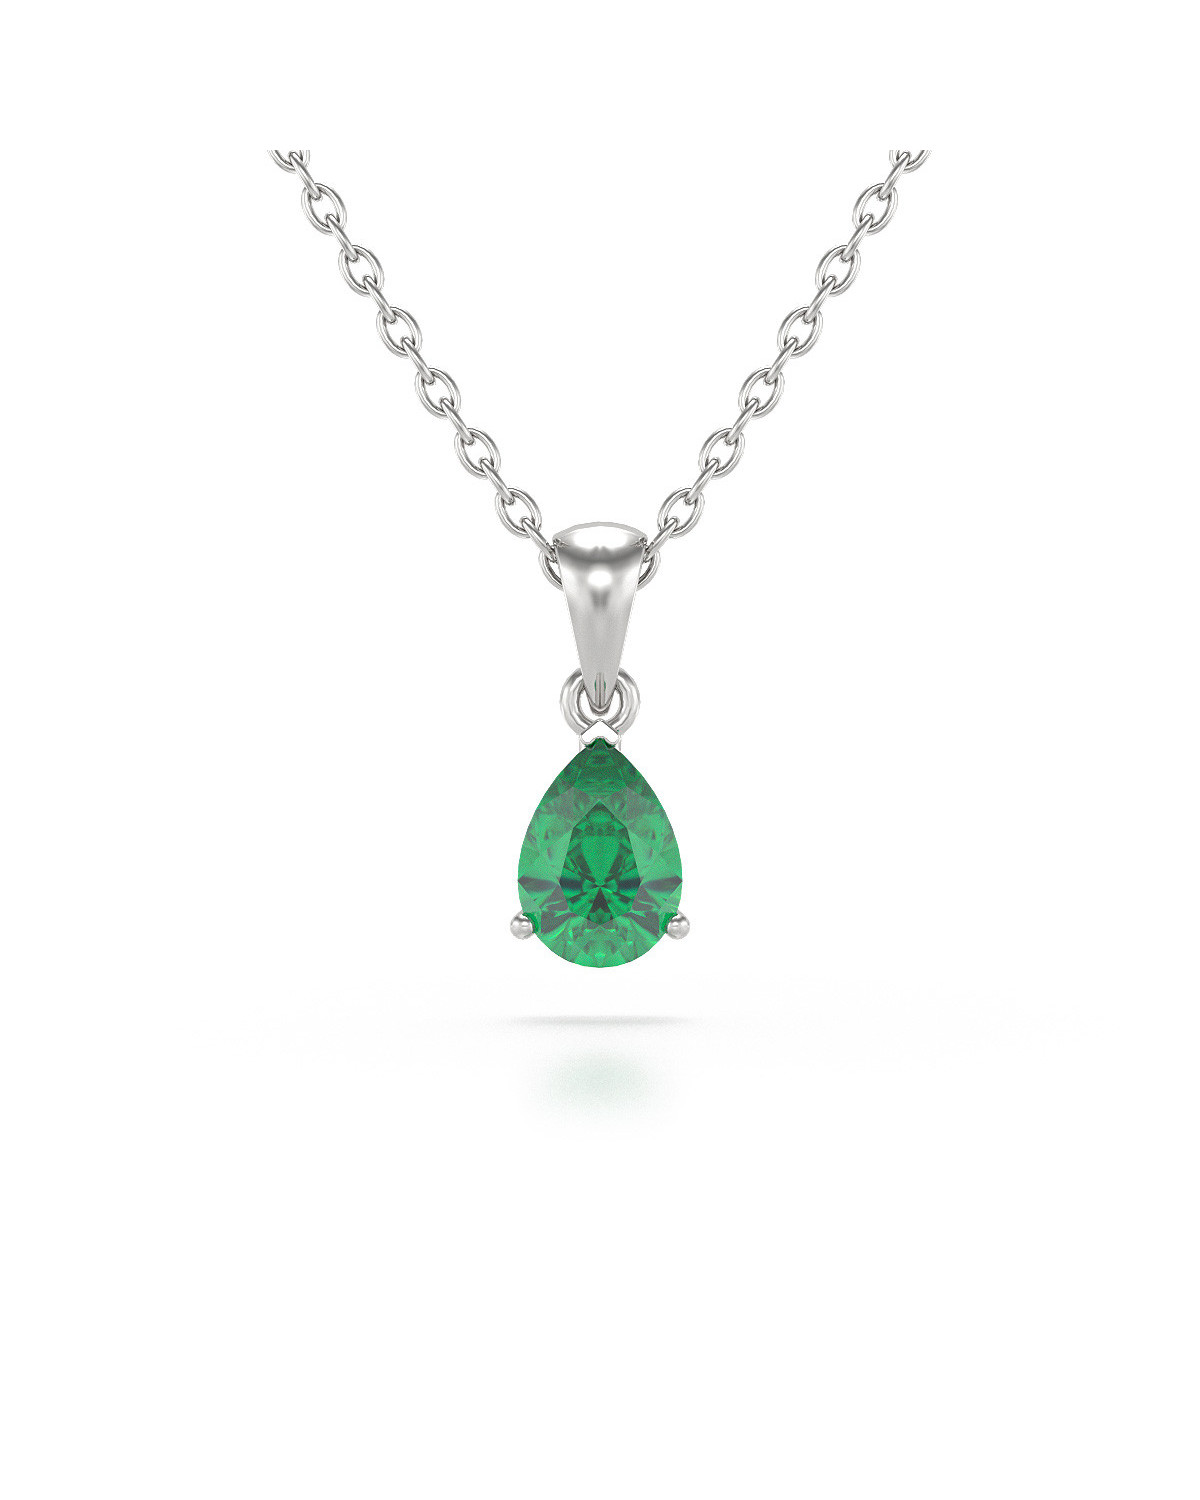 925 Silver Emerald Necklace Pendant Chain included